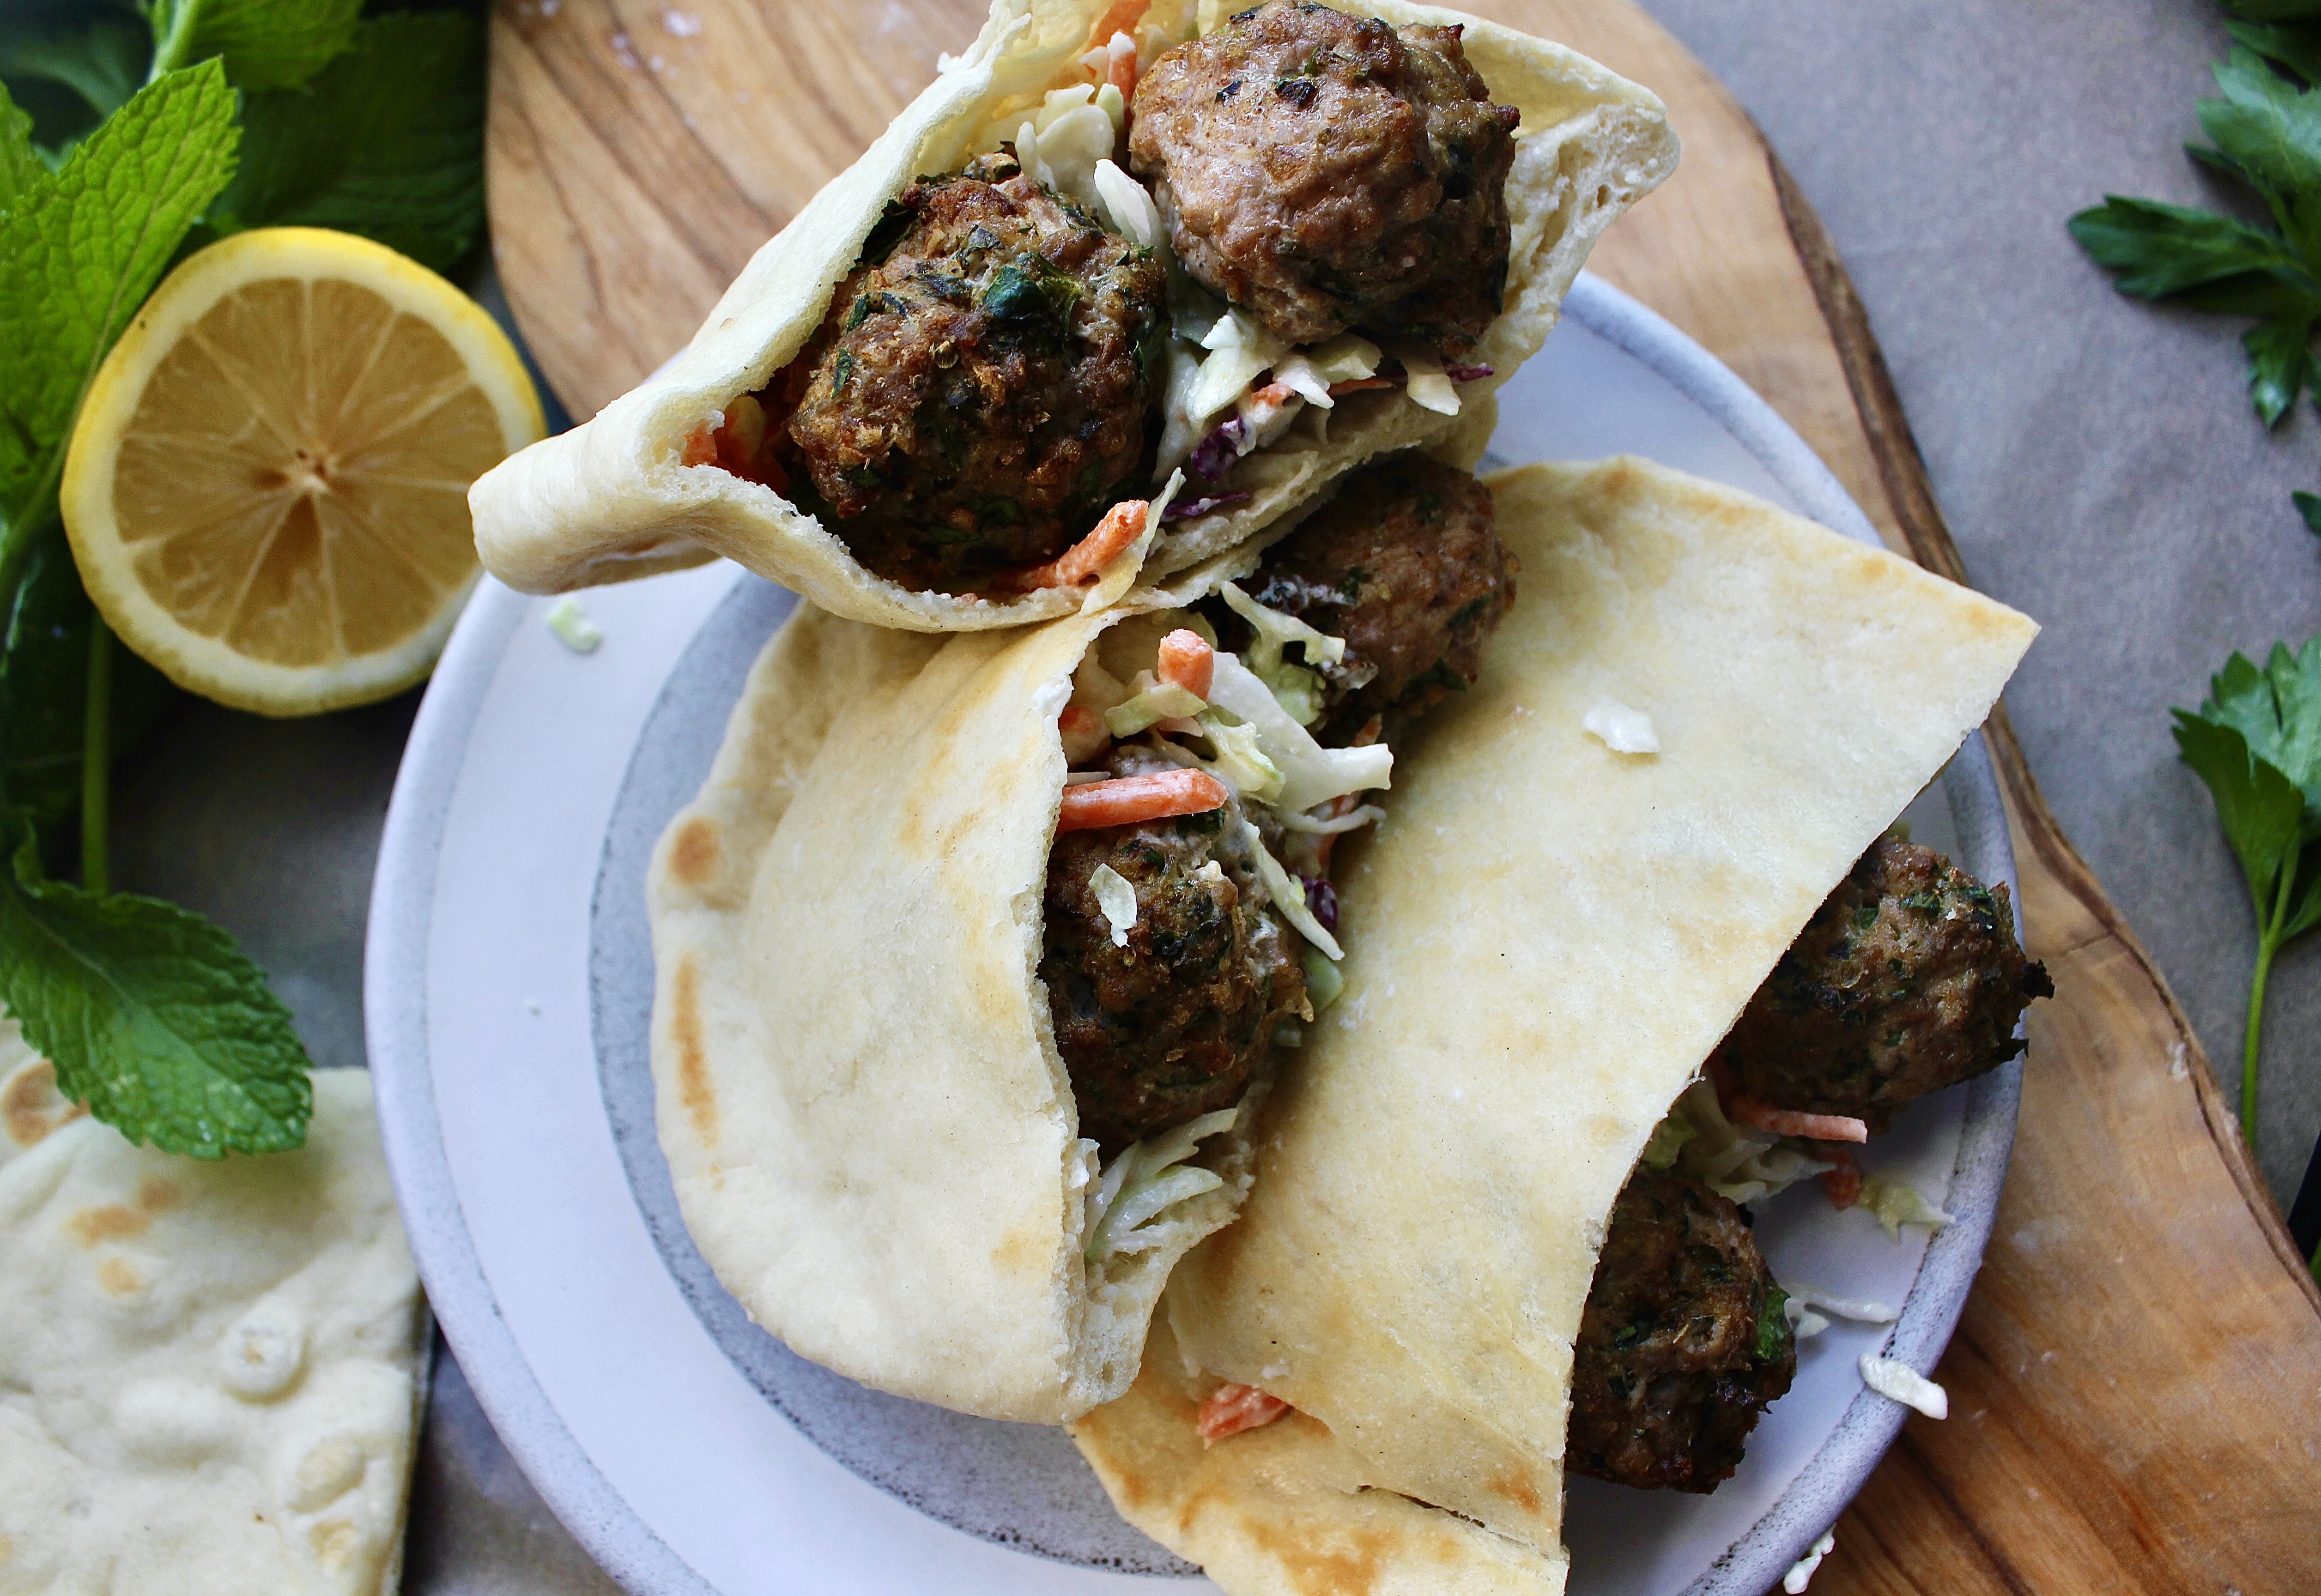 Super simple Greek Meatballs and a tangy whipped feta slaw all tucked into a warm pita: this Lemon Meatball Pitas with Tahini Feta Slaw are a crowd pleaser!!